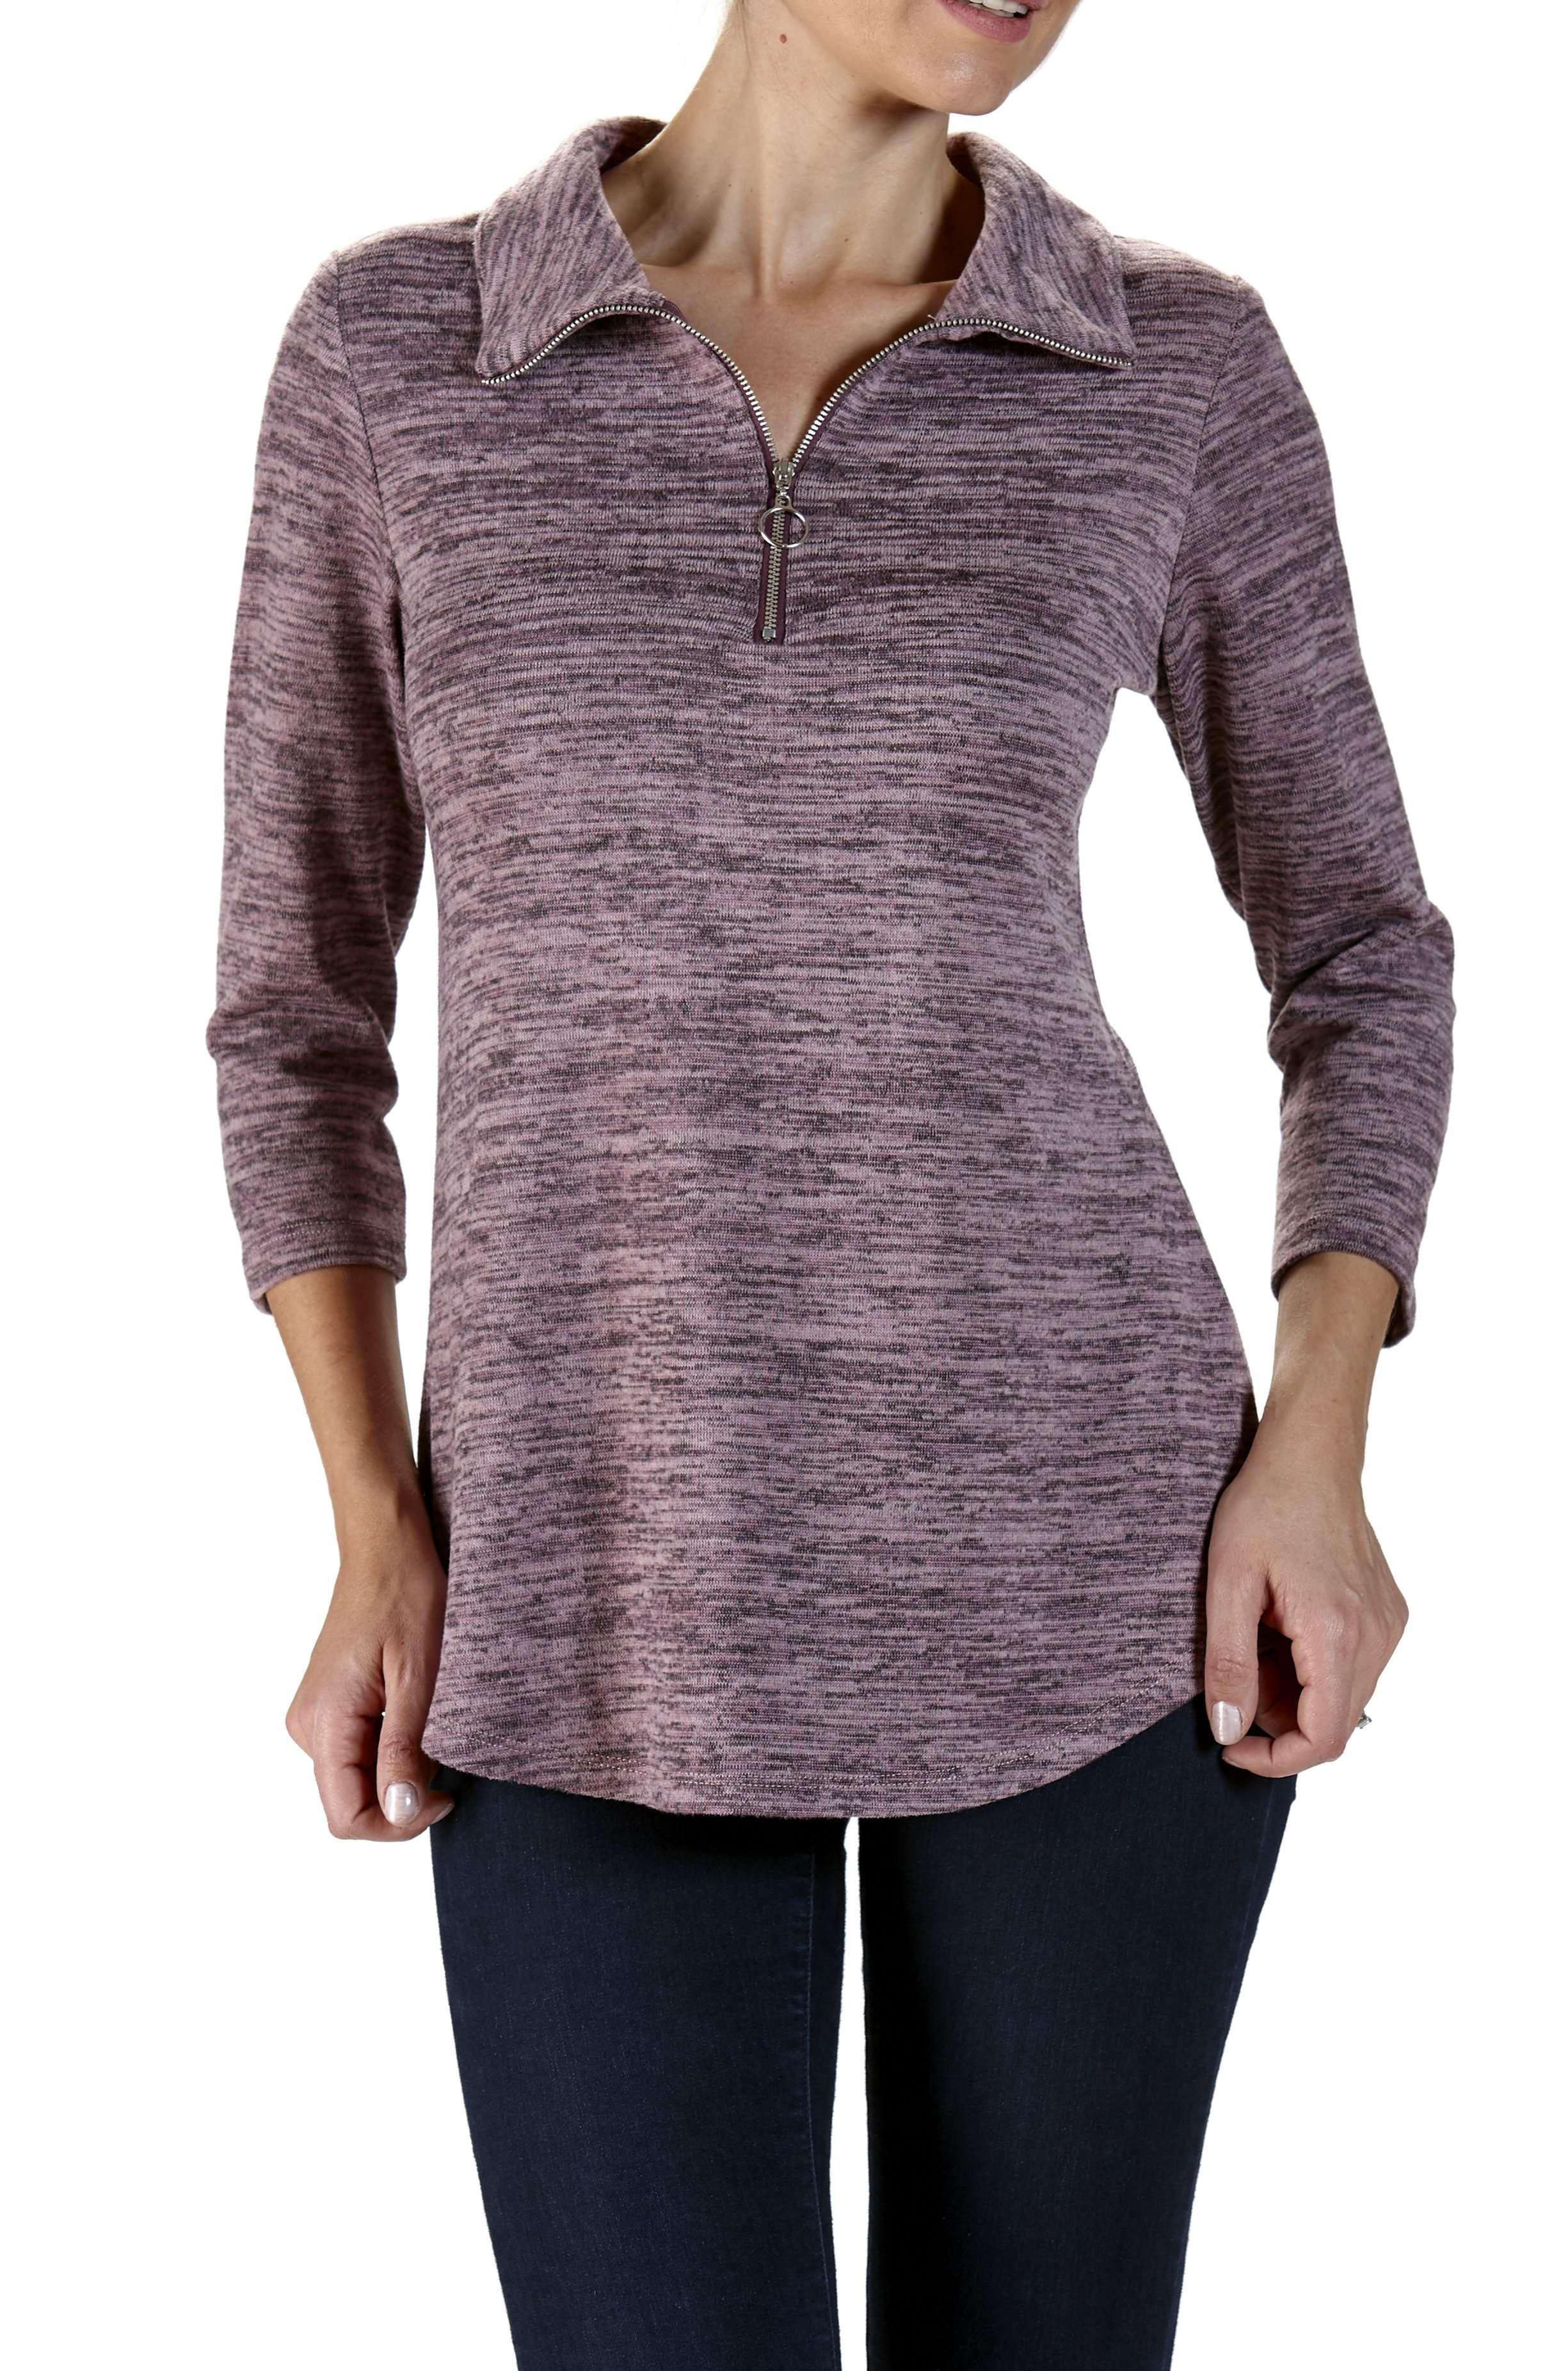 Women's Sweaters On Sale Rose Soft Cozy Stretch Knit Fabric Made in Canada - Yvonne Marie - Yvonne Marie